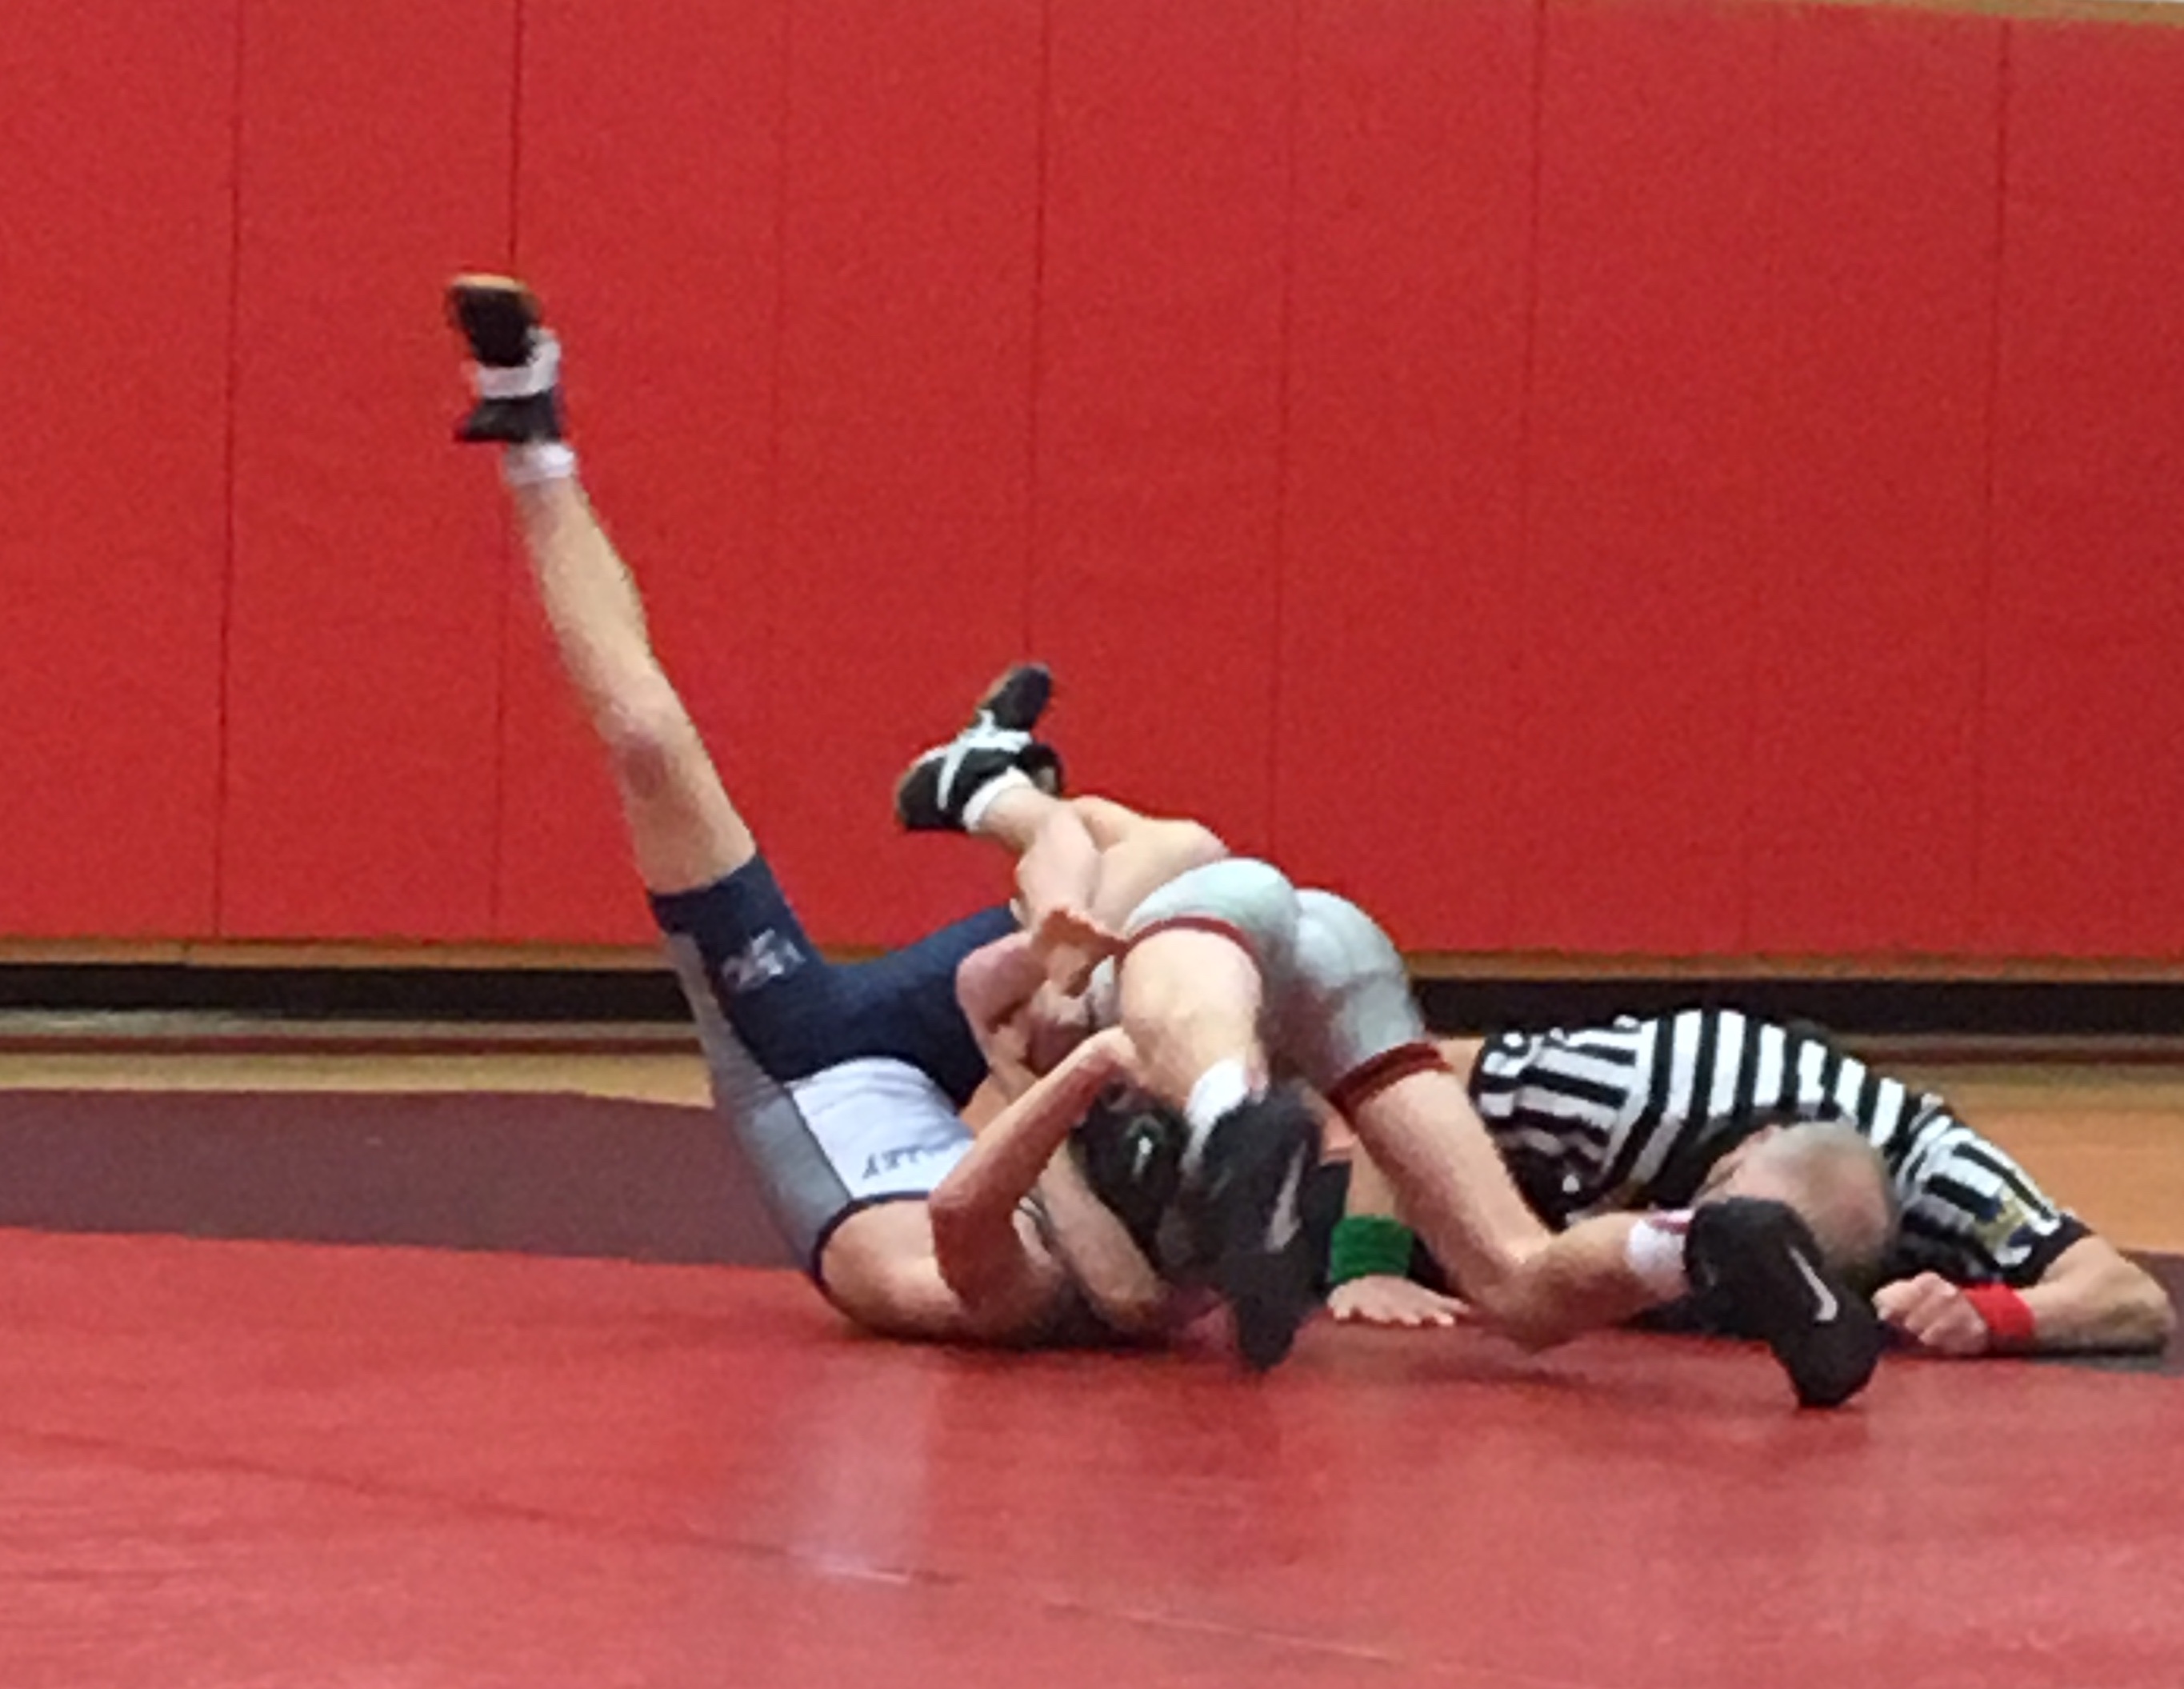 Evan Davis locked up a cradle for a 10 second pin (Photo by Eve Siegel)